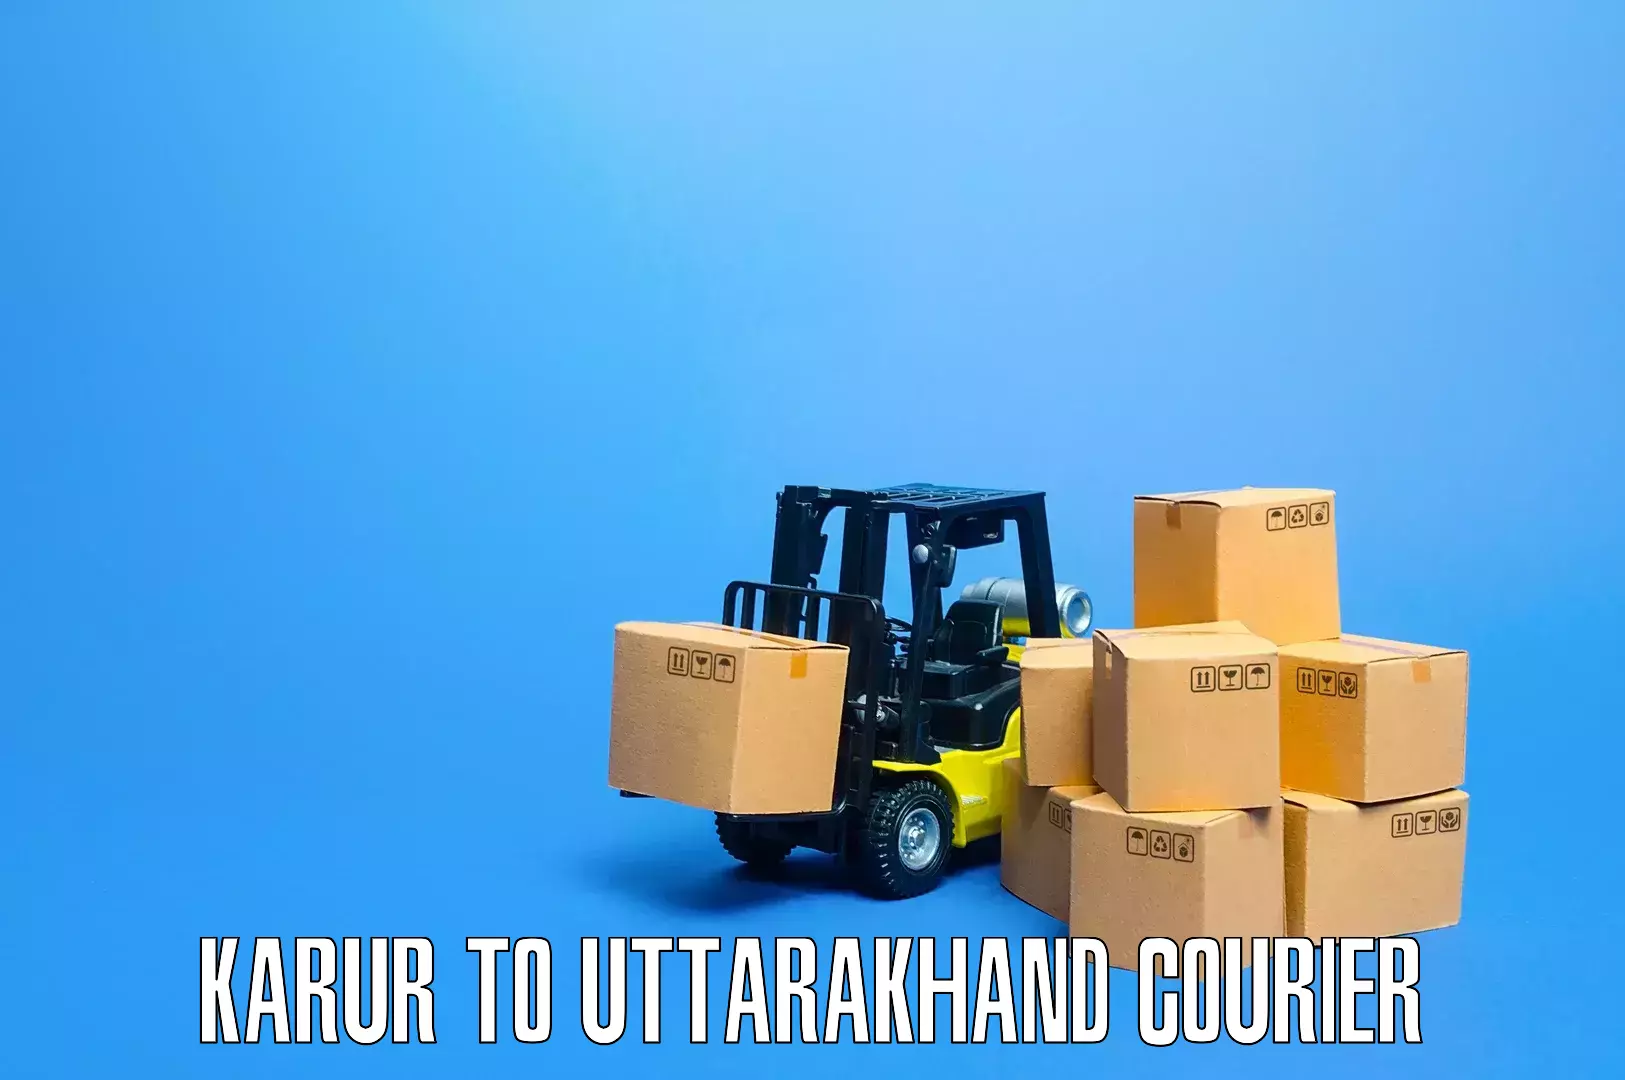 Moving and handling services Karur to Roorkee